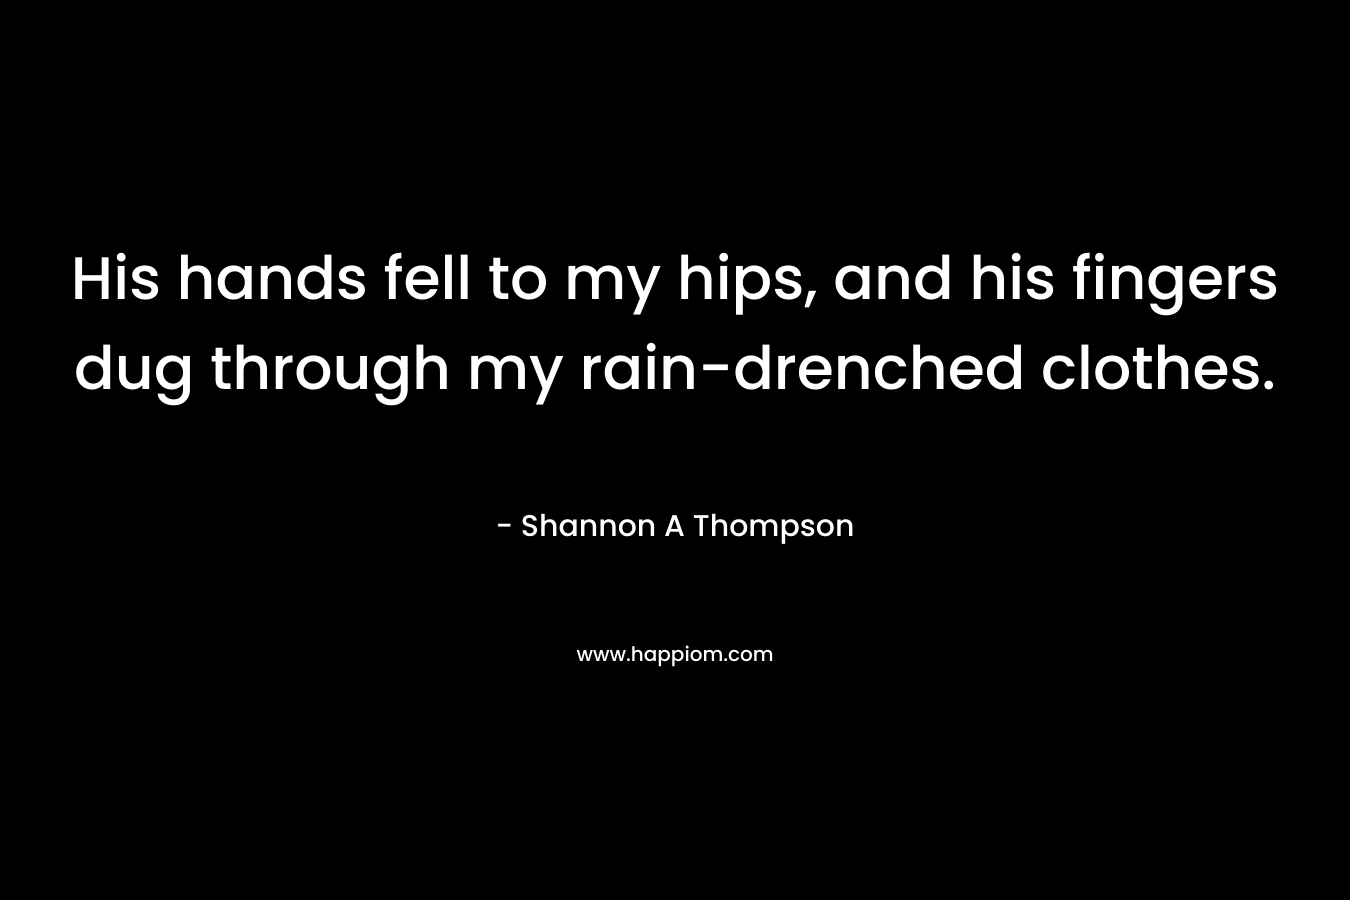 His hands fell to my hips, and his fingers dug through my rain-drenched clothes.